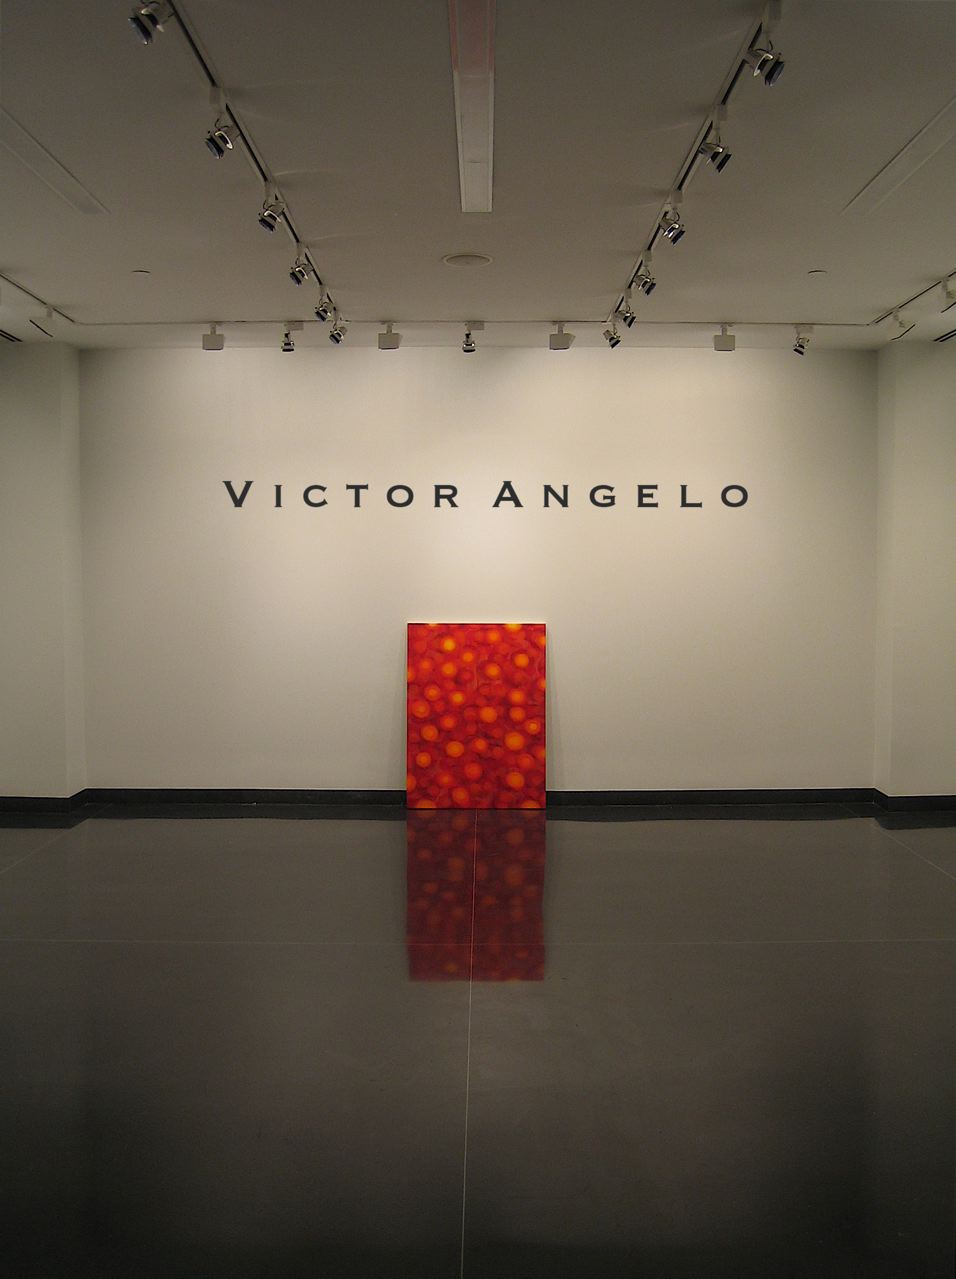 Victor Angelo reflection painting invitational exhibition in Manhattan NYC